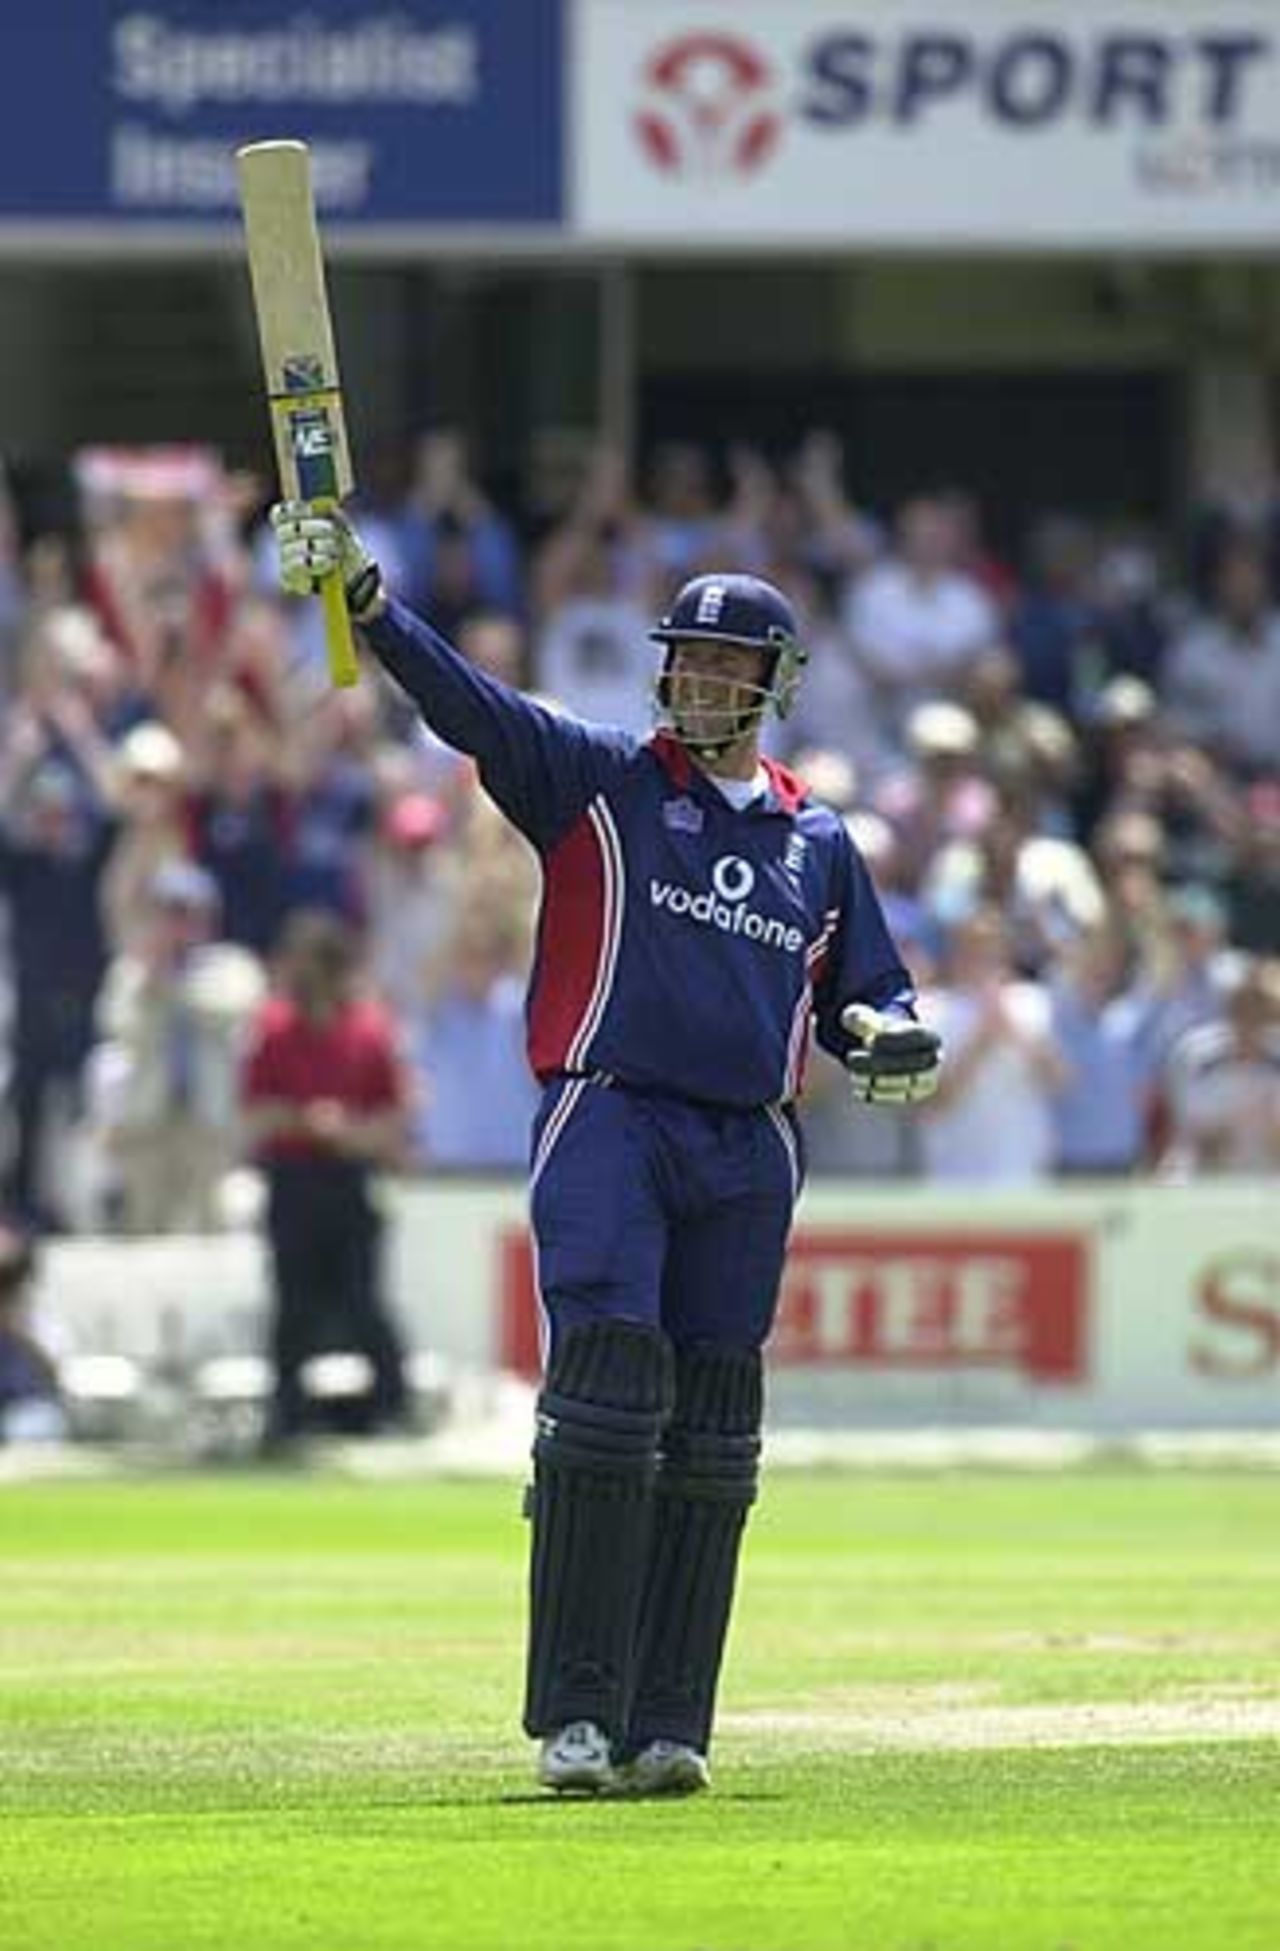 Marcus Trescothick with a well earnt ton, NatWest Series Final, 13th July 2002